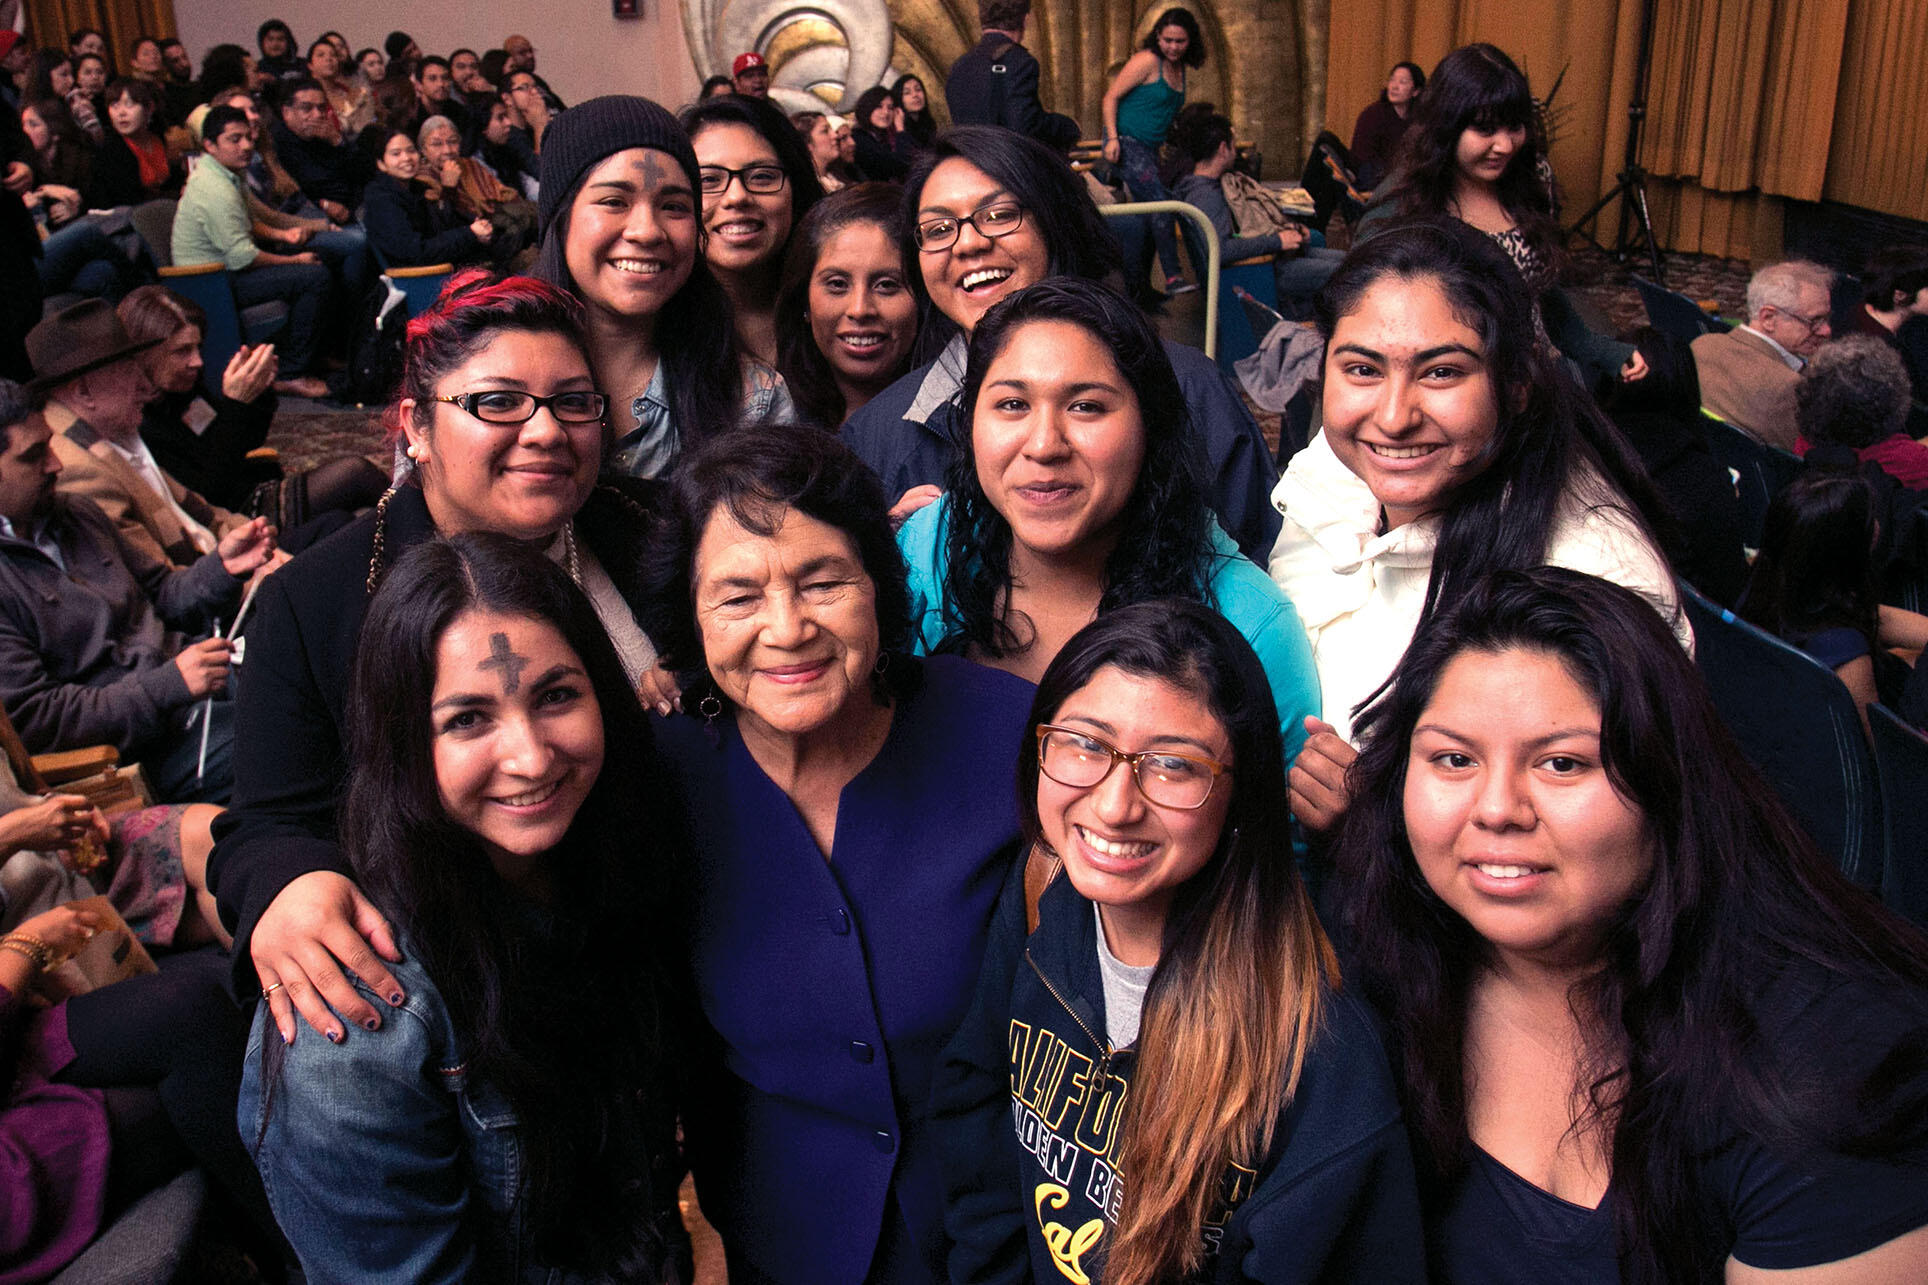 Dolores Huerta surrounded by young women at the screening of  “Cesar Chavez.” (Photo by Jim Block.)